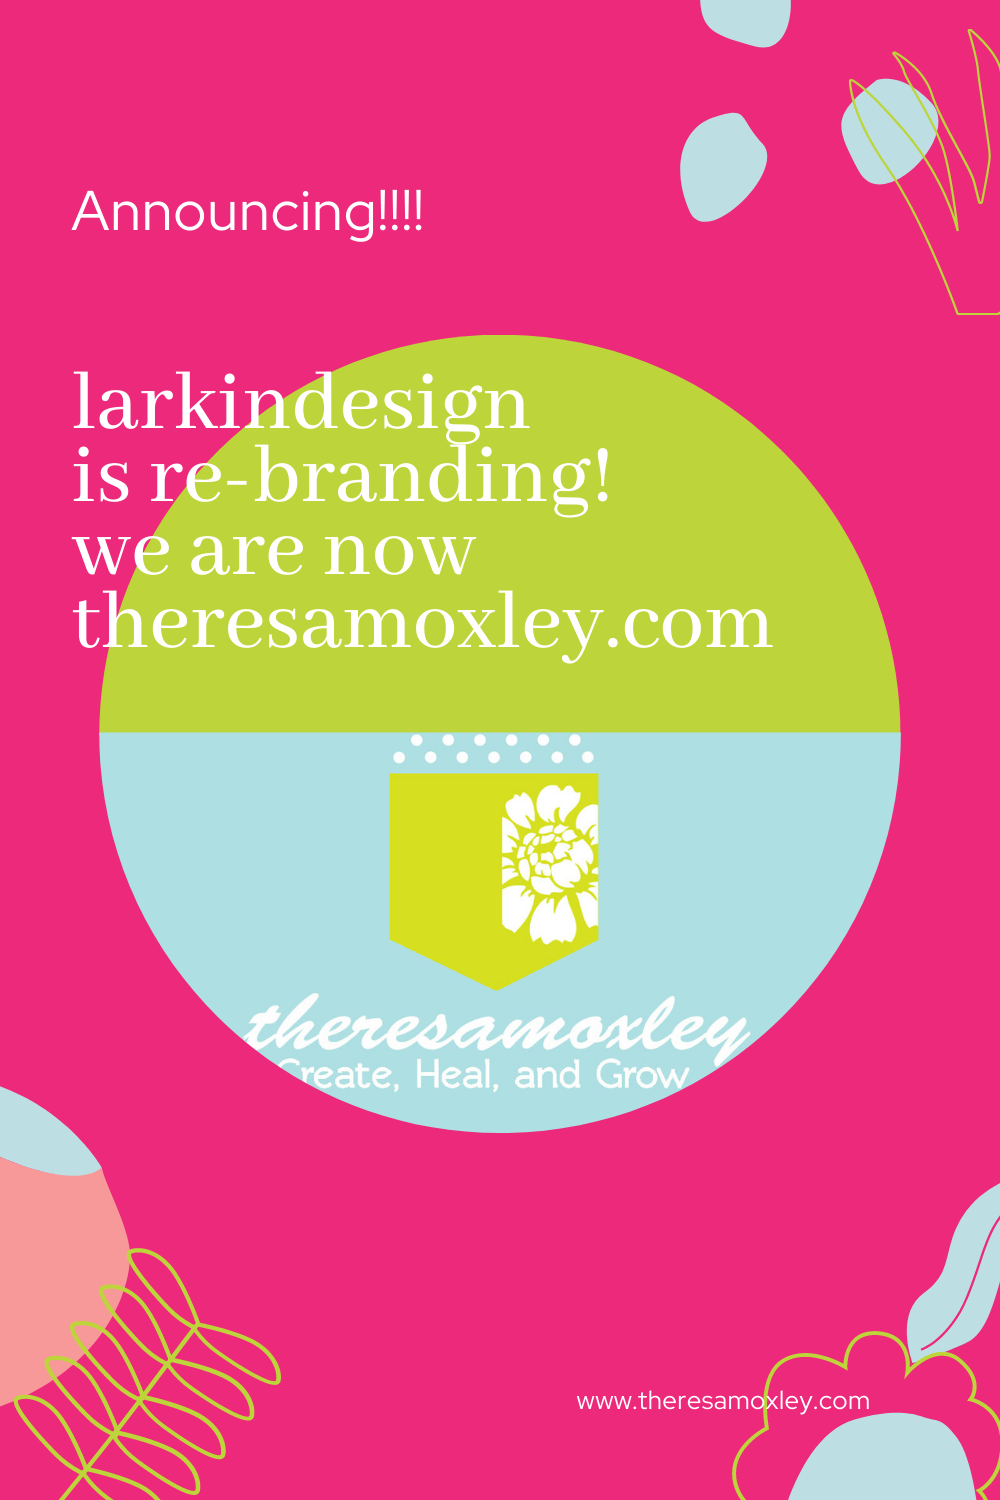 Brand Announcement! Larkindesign Is Now Theresa Moxley!